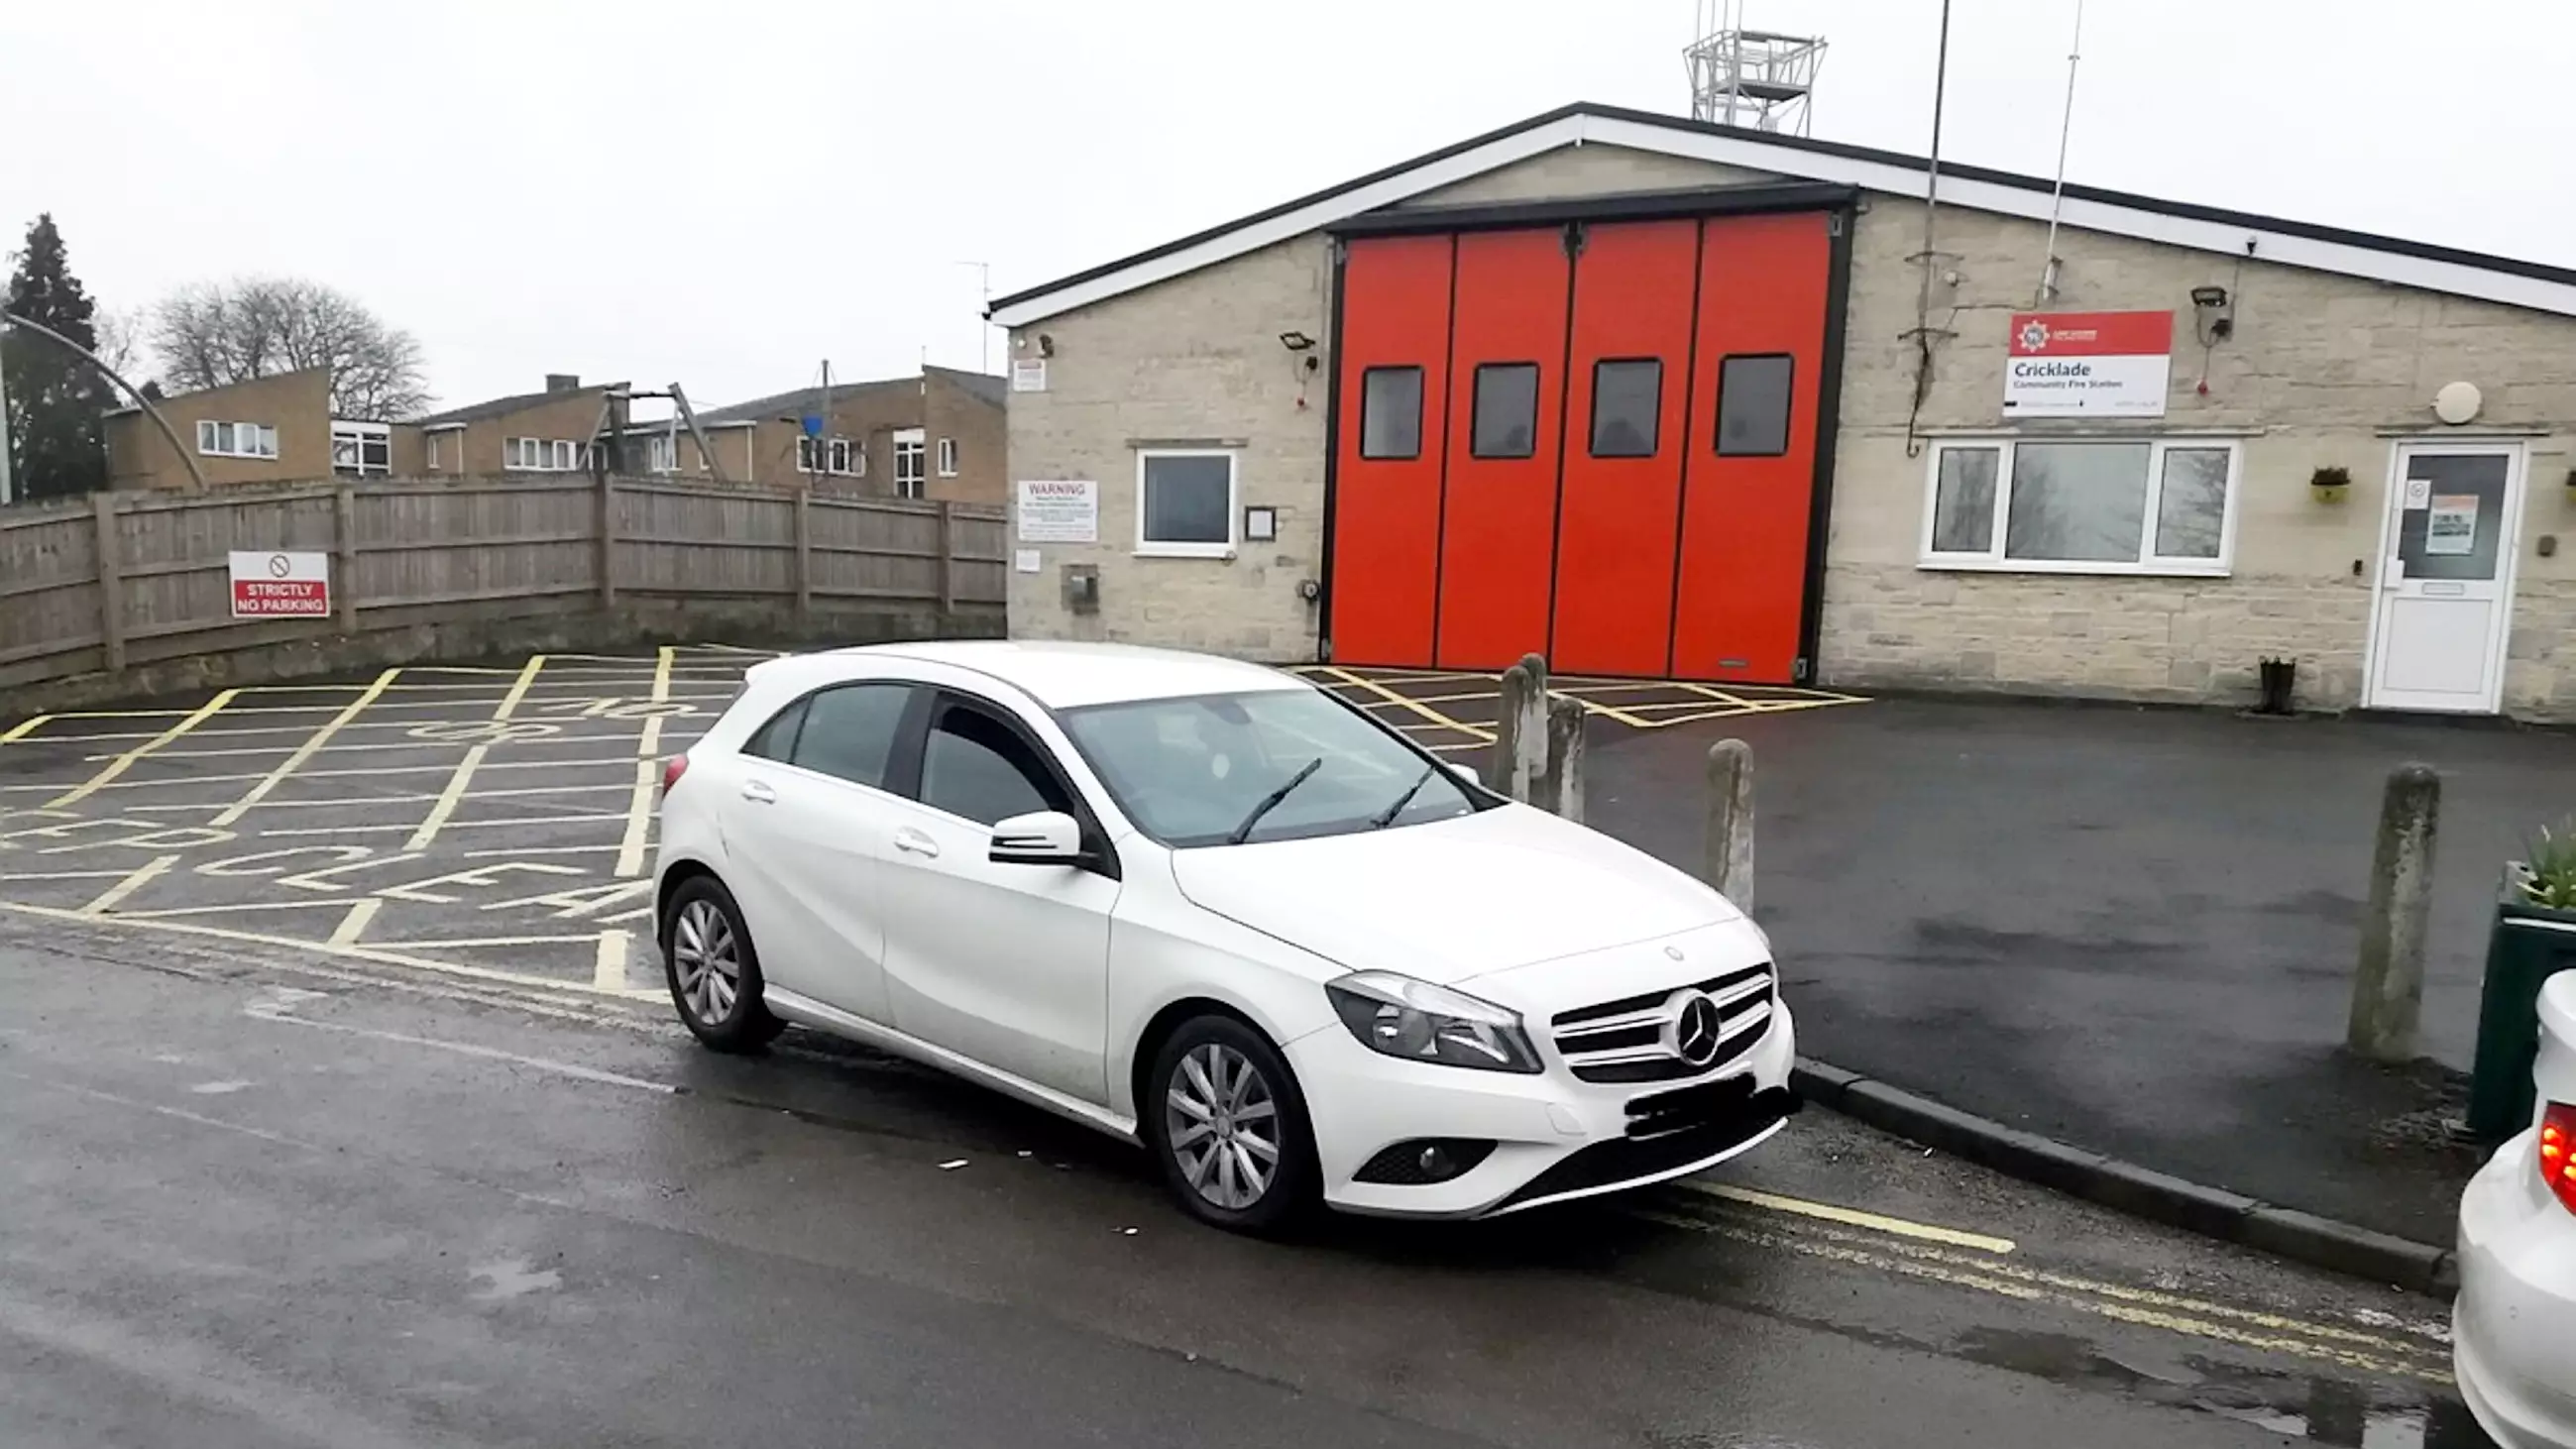 Parent On School Run Refuses To Move Car Blocking Fire Station